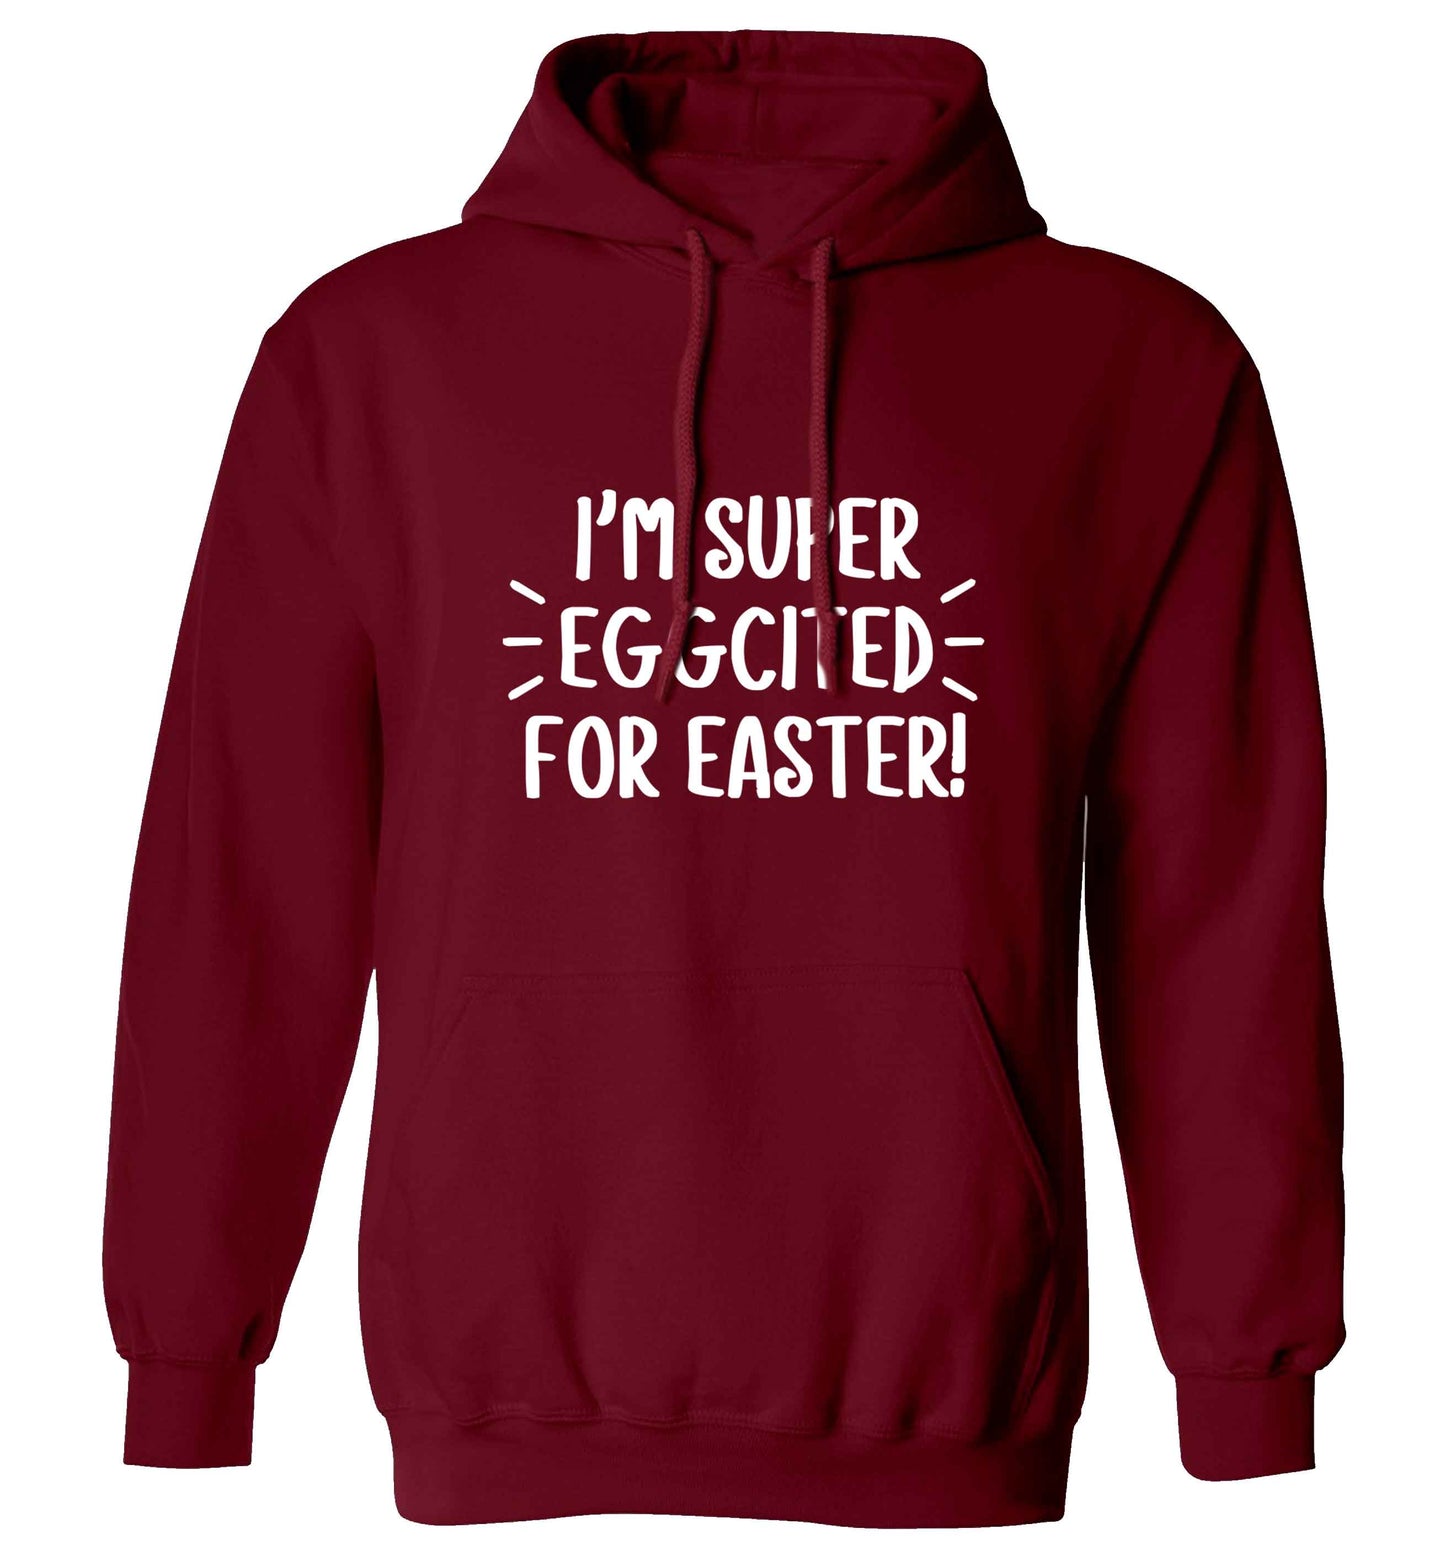 I'm super eggcited for Easter adults unisex maroon hoodie 2XL